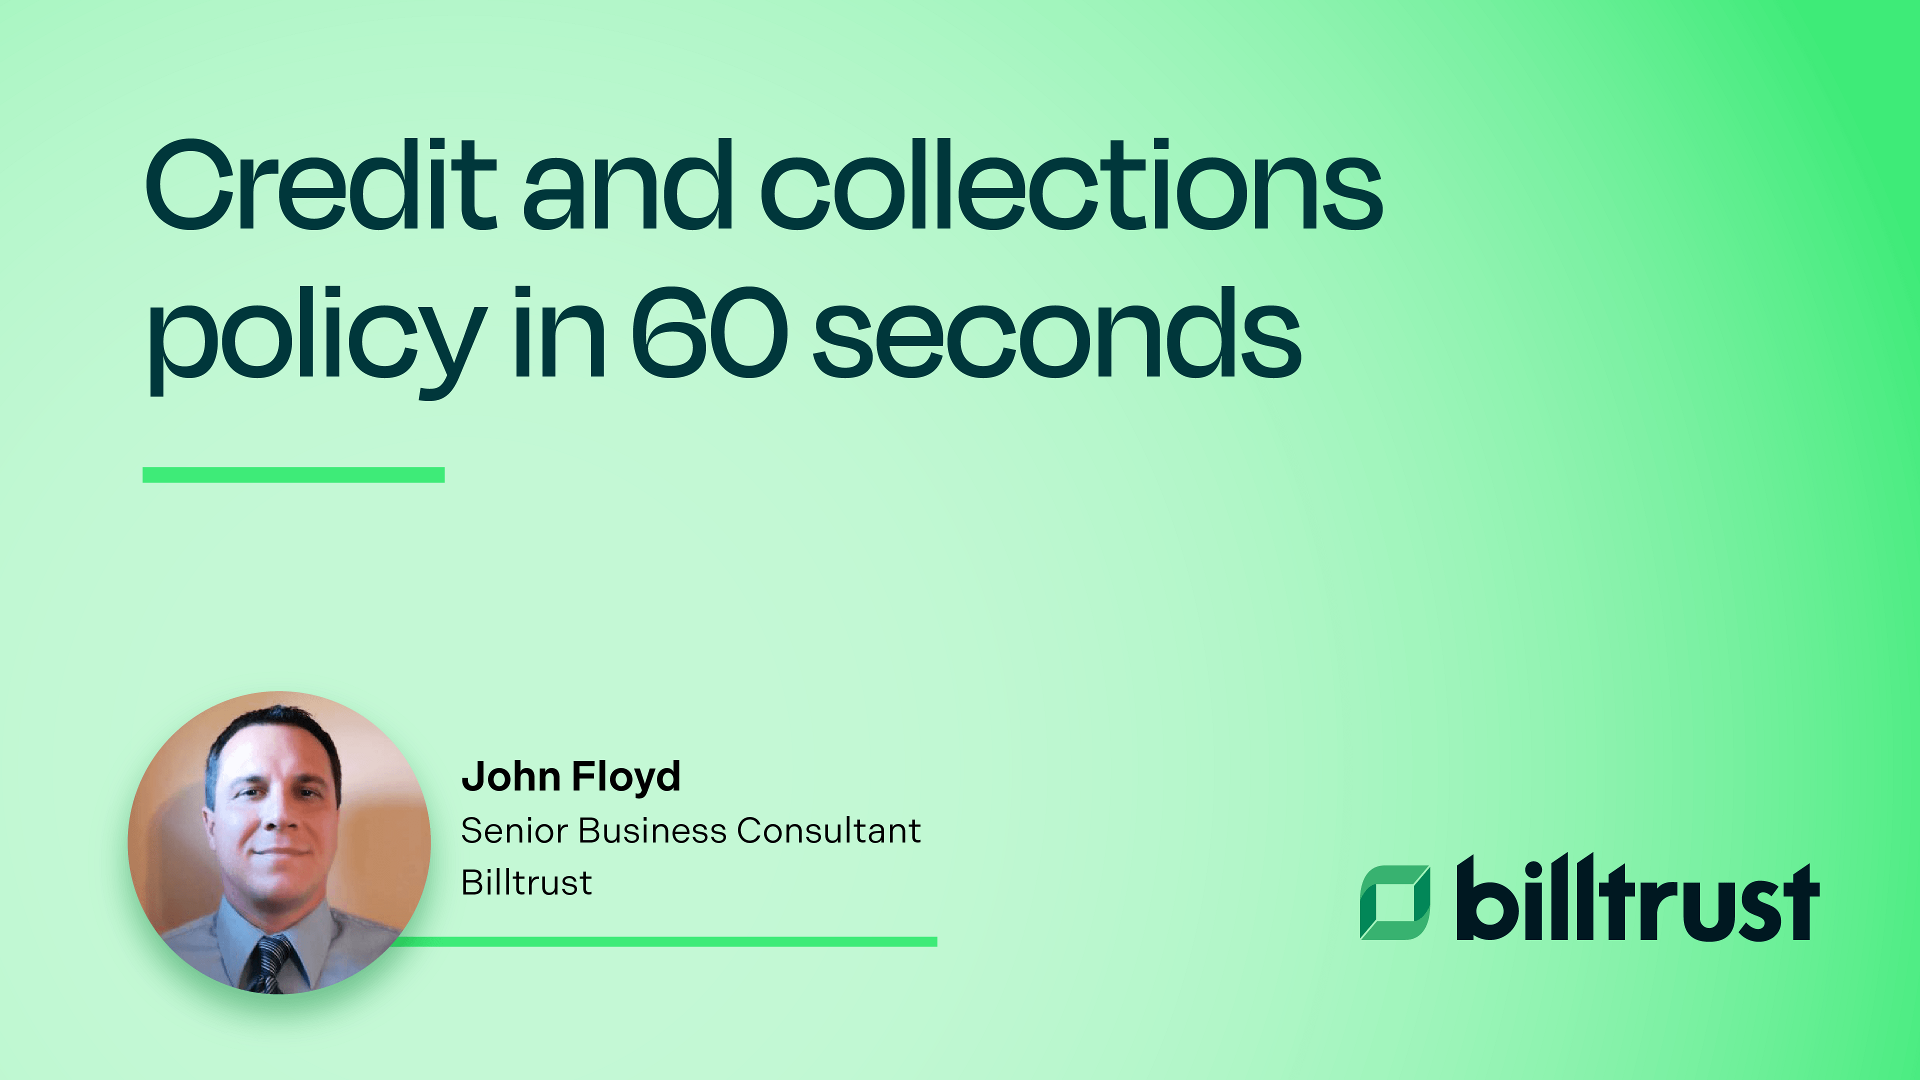 Credit and collections policy in 60 seconds